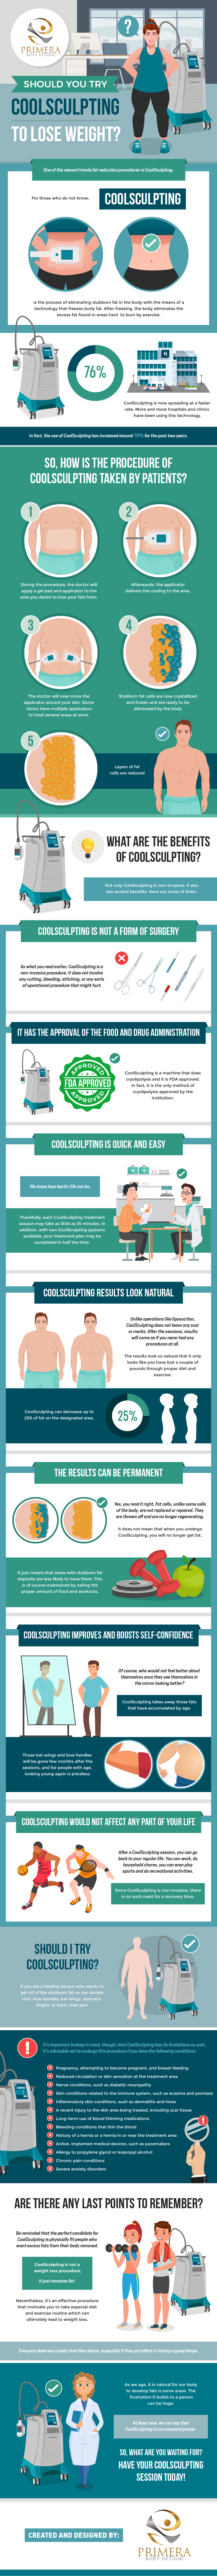 Should you try CoolSculpting to Lose Weight